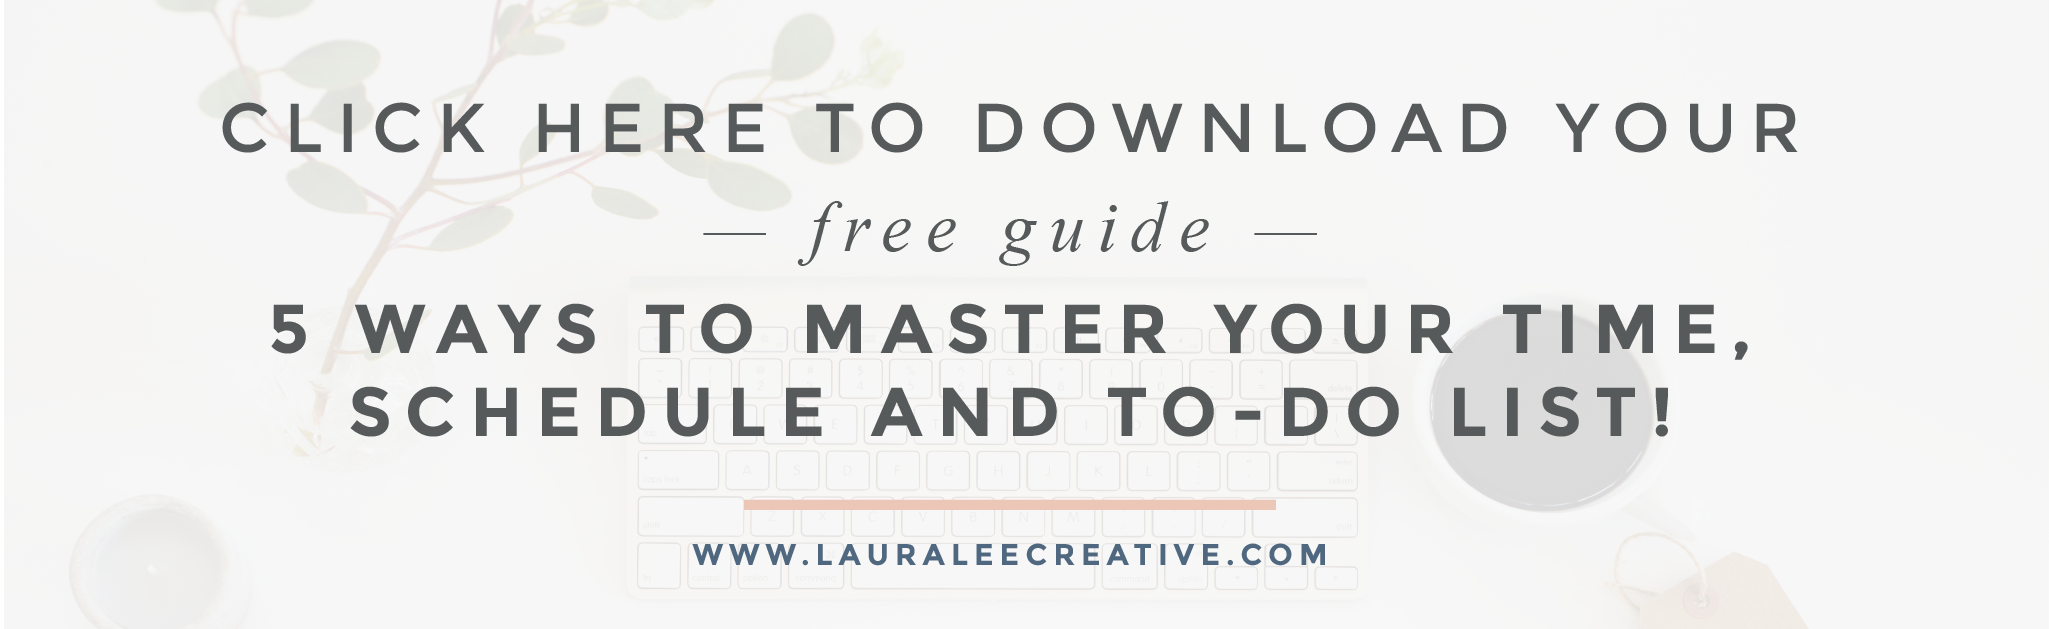 5 Ways to Master Your Time, Schedule, and To-Do List! FREE GUIDE!!